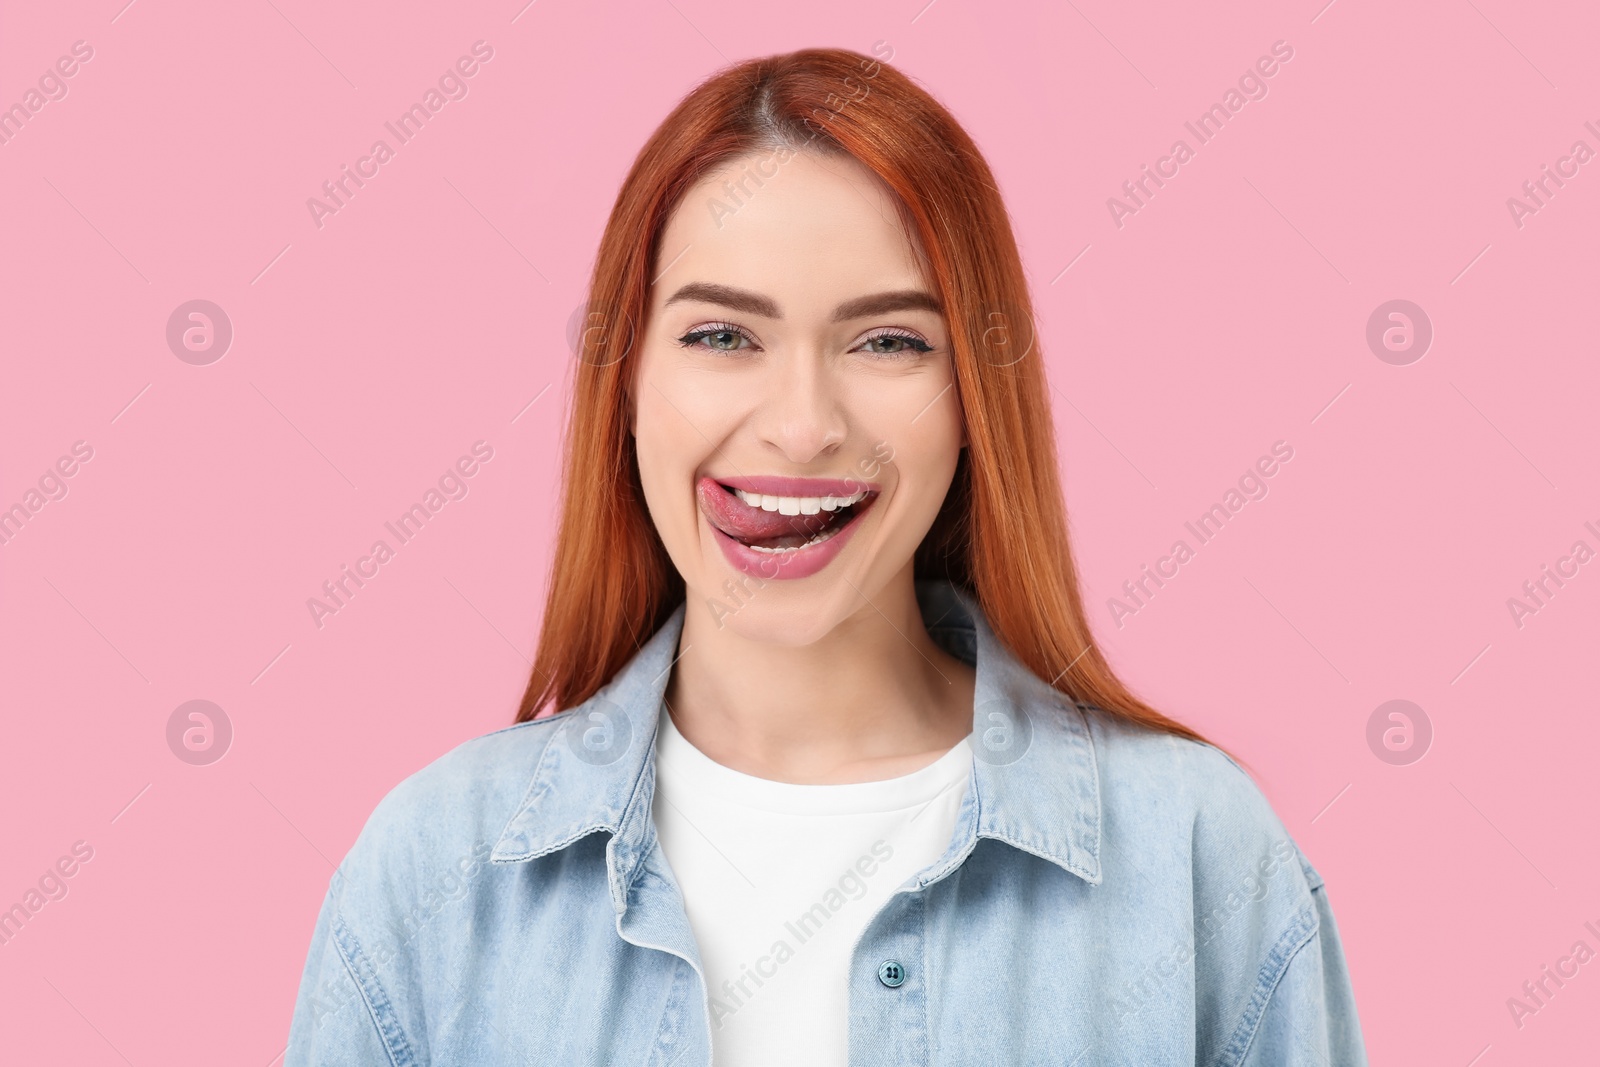 Photo of Happy woman showing her tongue on pink background